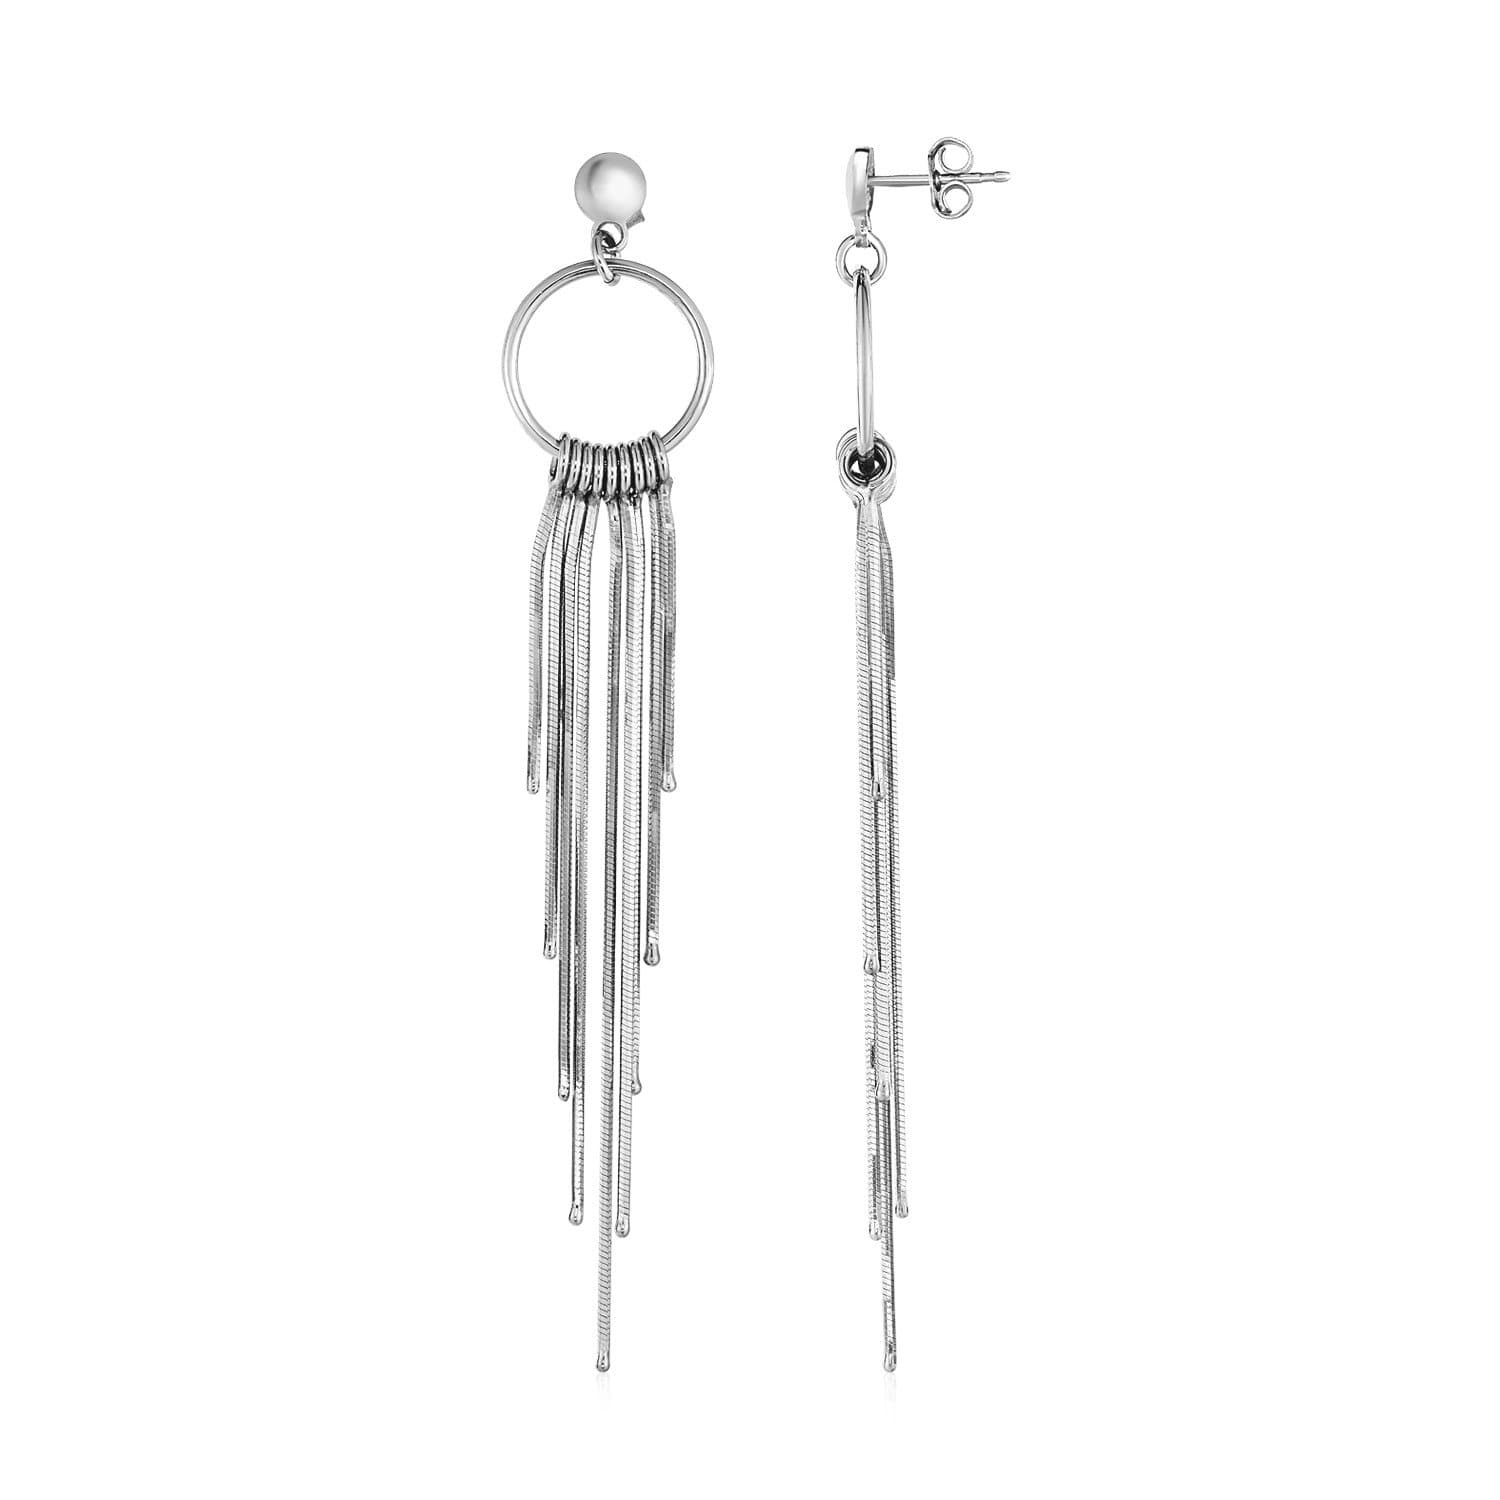 Earrings with Circles and Wire Tassels in Sterling Silver